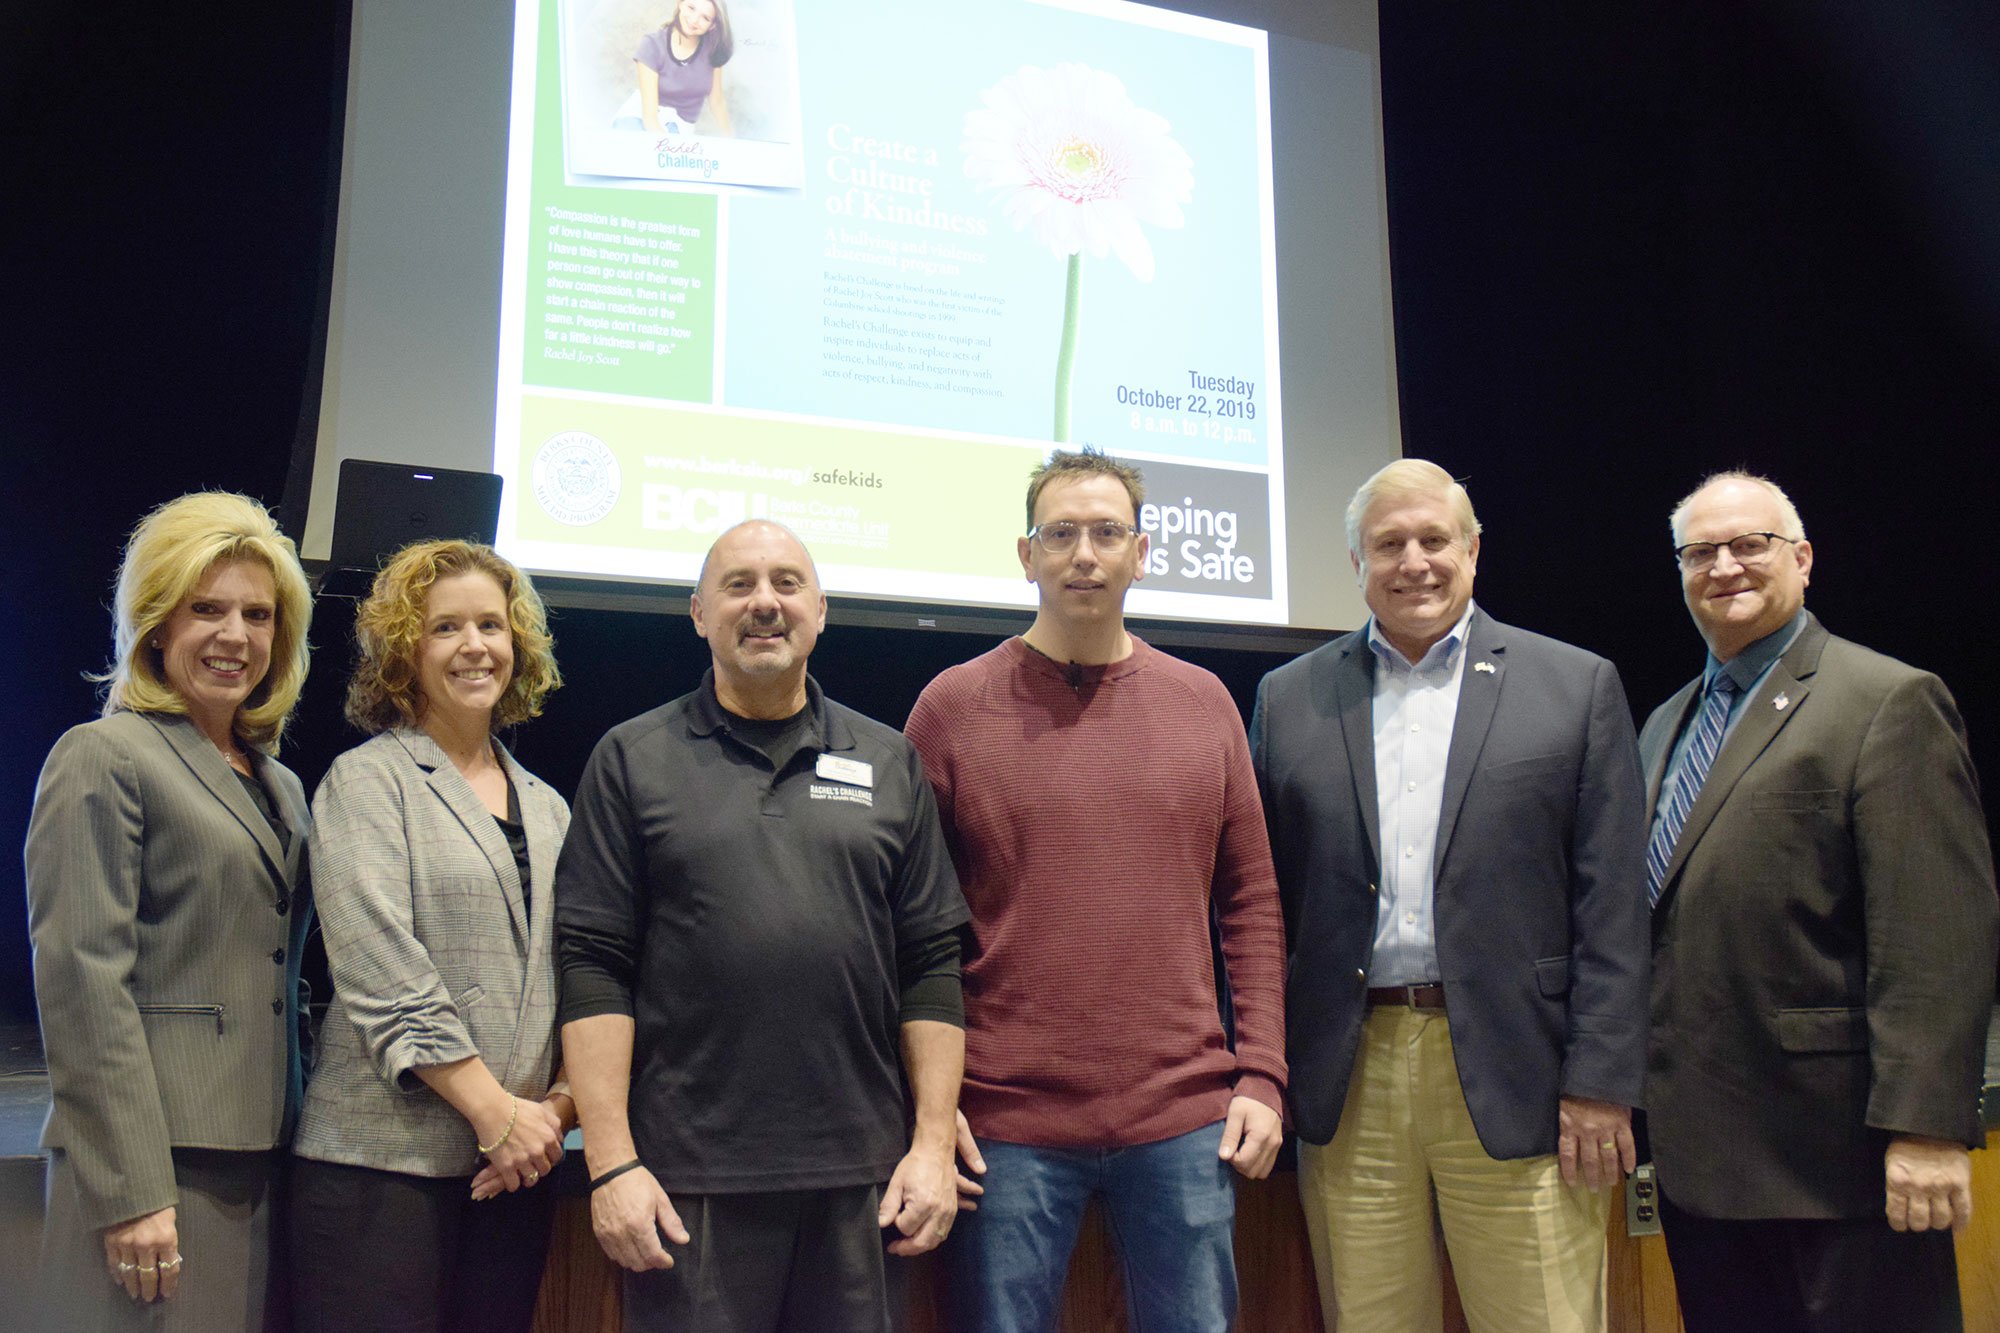 Michael Scott (center) of Rachel's Challenge with BCIU leadership and local officials before the 2019 Keeping Kids Safe Symposium